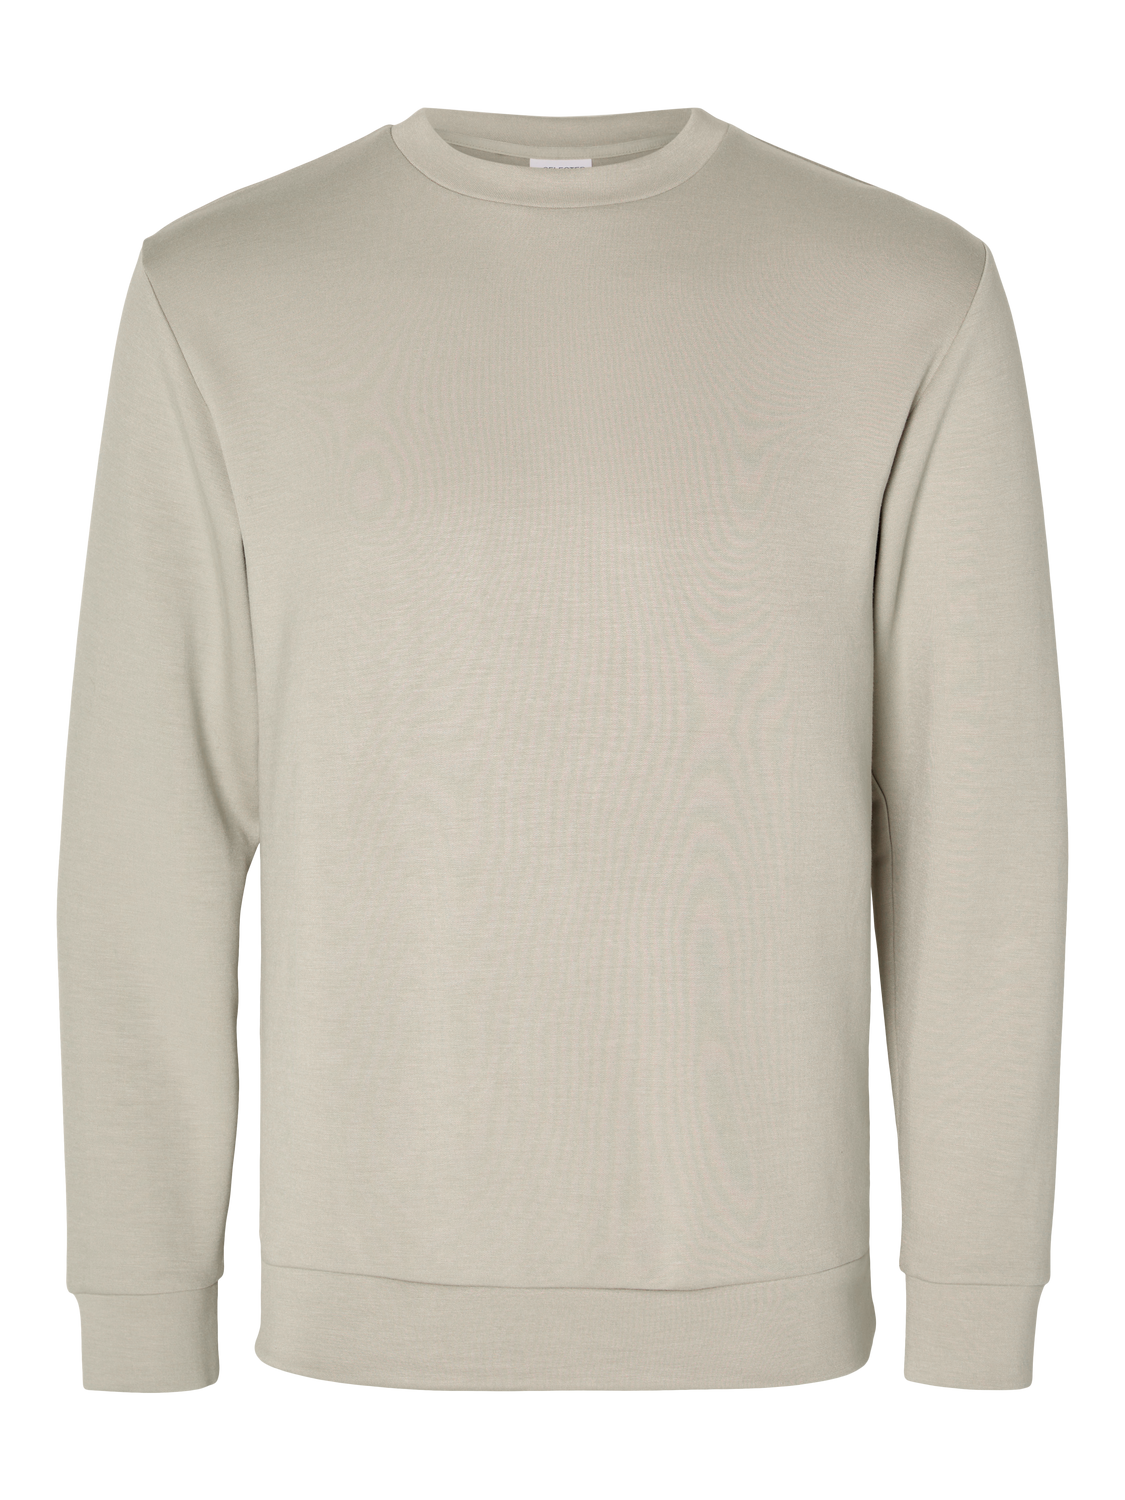 SELECTED HOMME - EMANUEL GENSER Sweat - Pure Cashmere